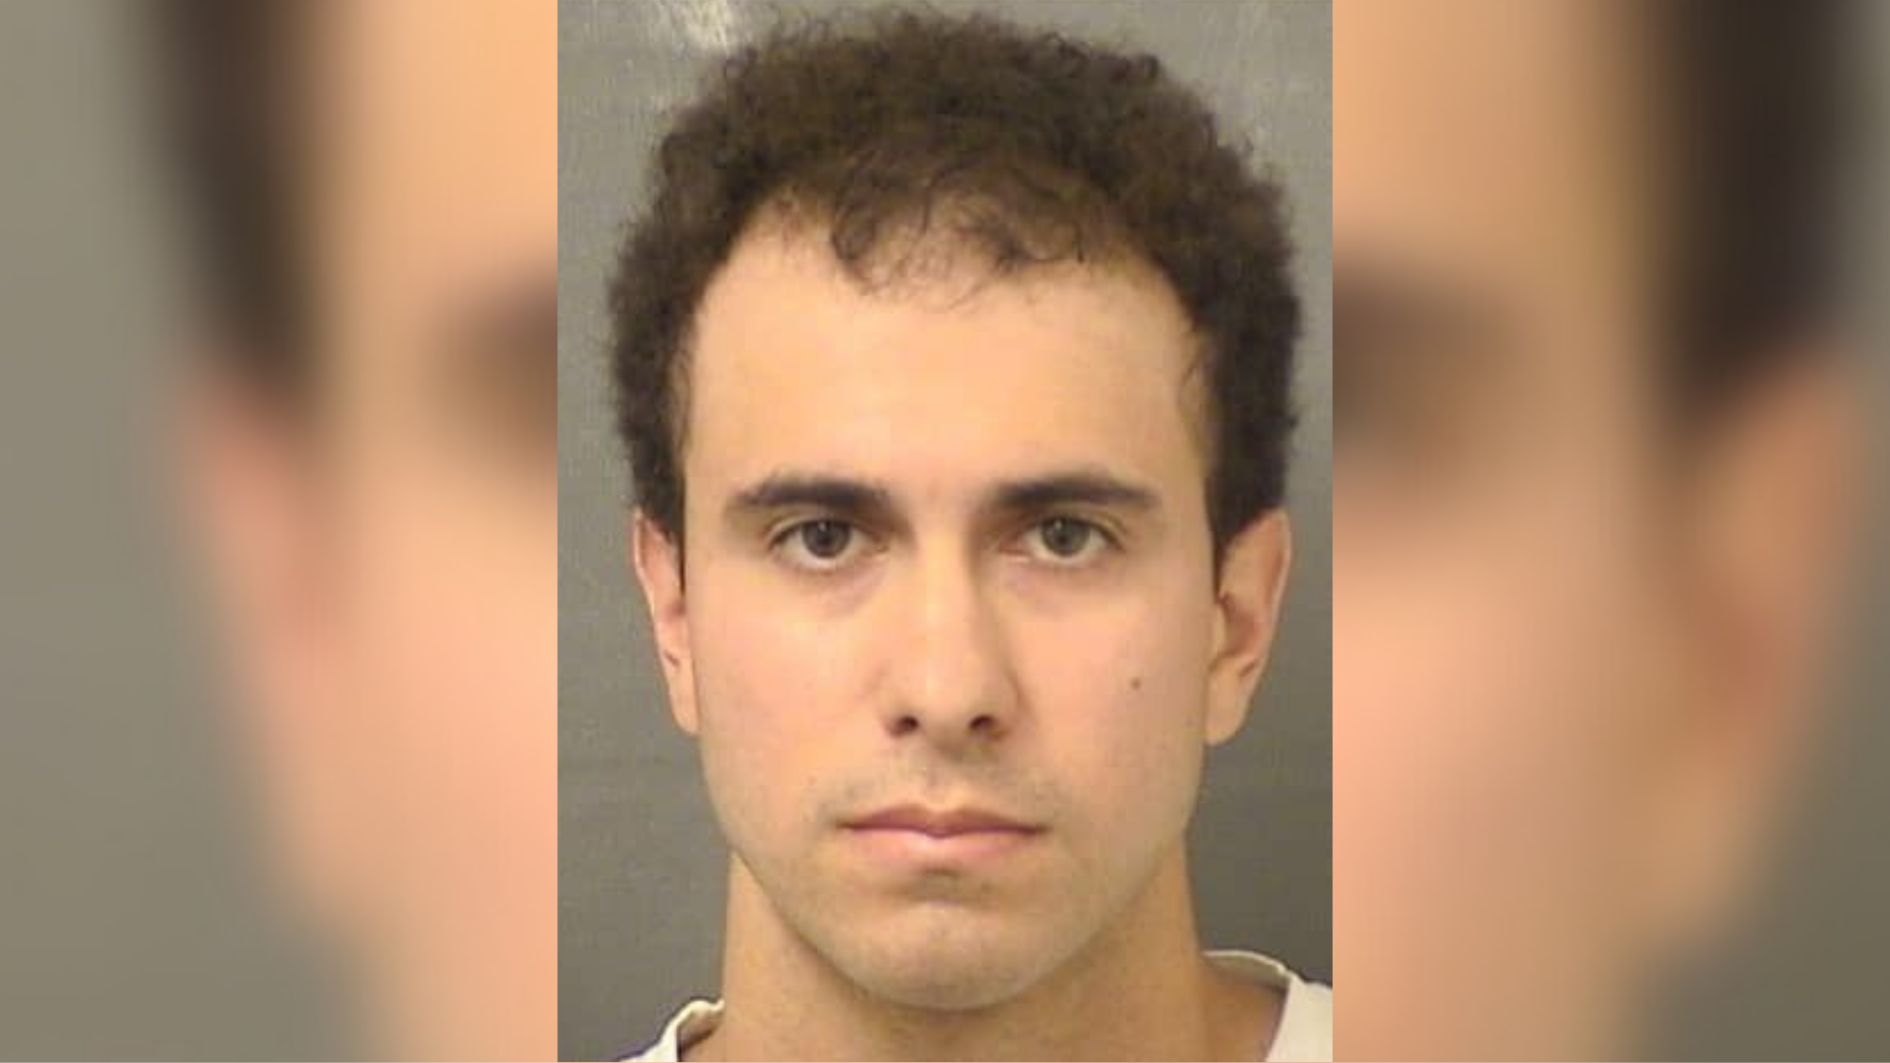 Former YMCA camp counselor arrested on child porn charges hq nude image